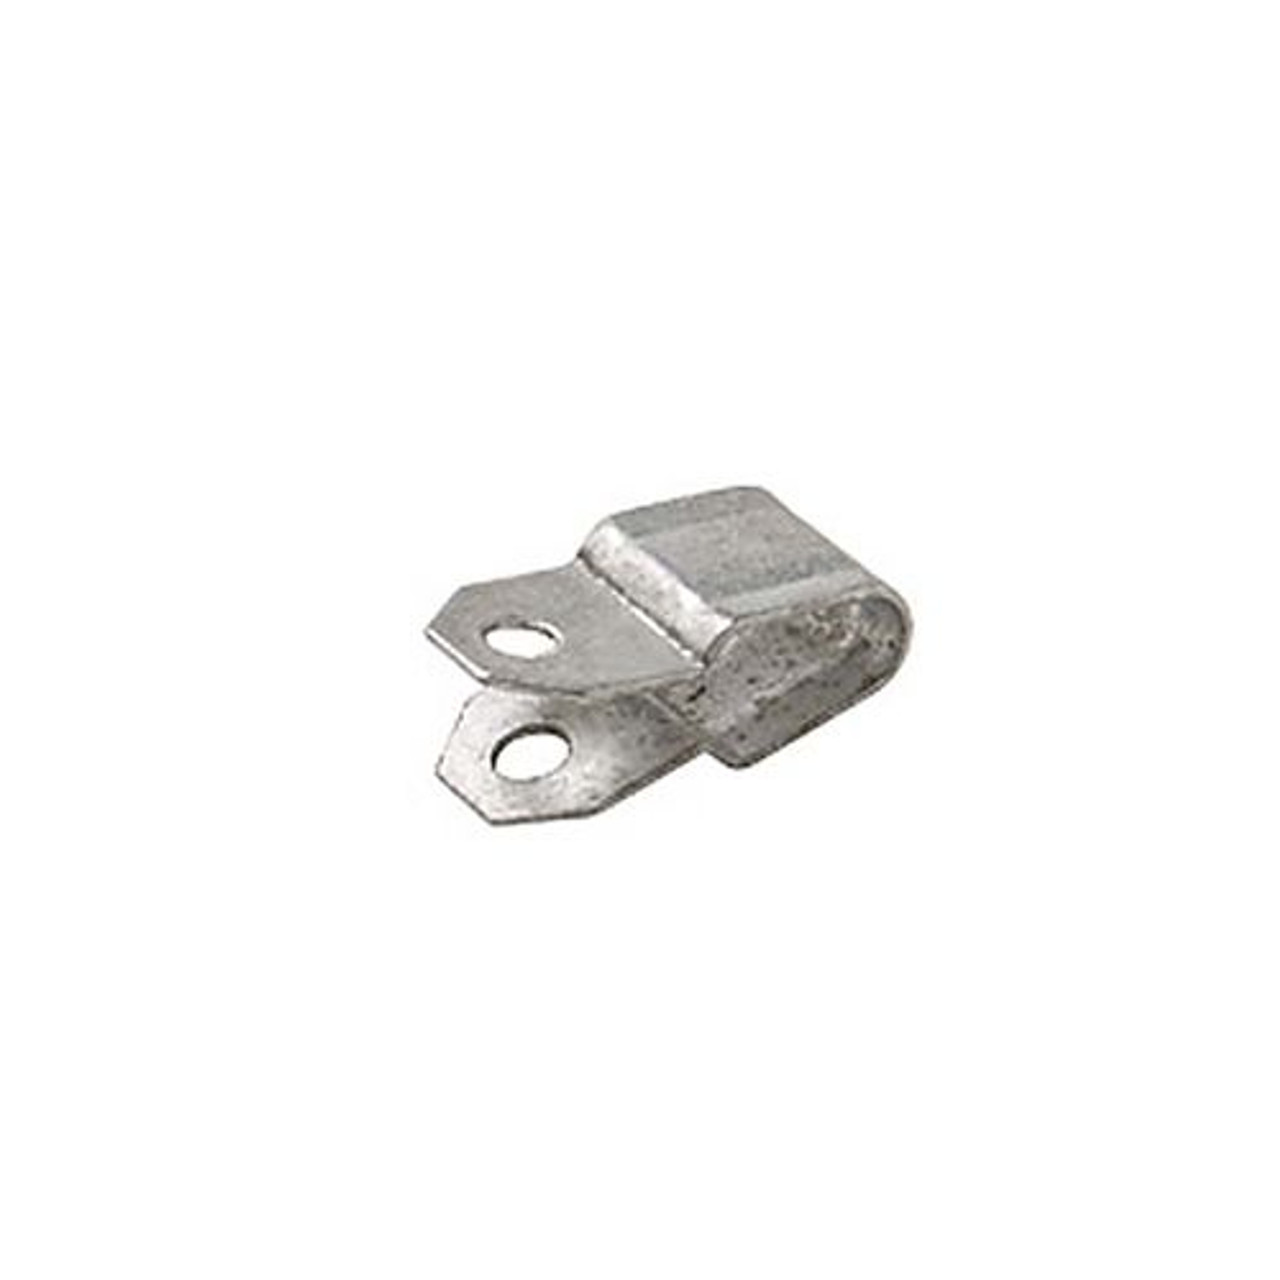 Steren 400-530 Steel E-Drop 50 Pack Cable Clip Metal Clamp Coaxial Wire for Overhead Drop Installation Secure to Wood or Masonry, Galvanized E-Drop Coaxial Cable Clip Wire Strap Holder Fastener, Part # 400530